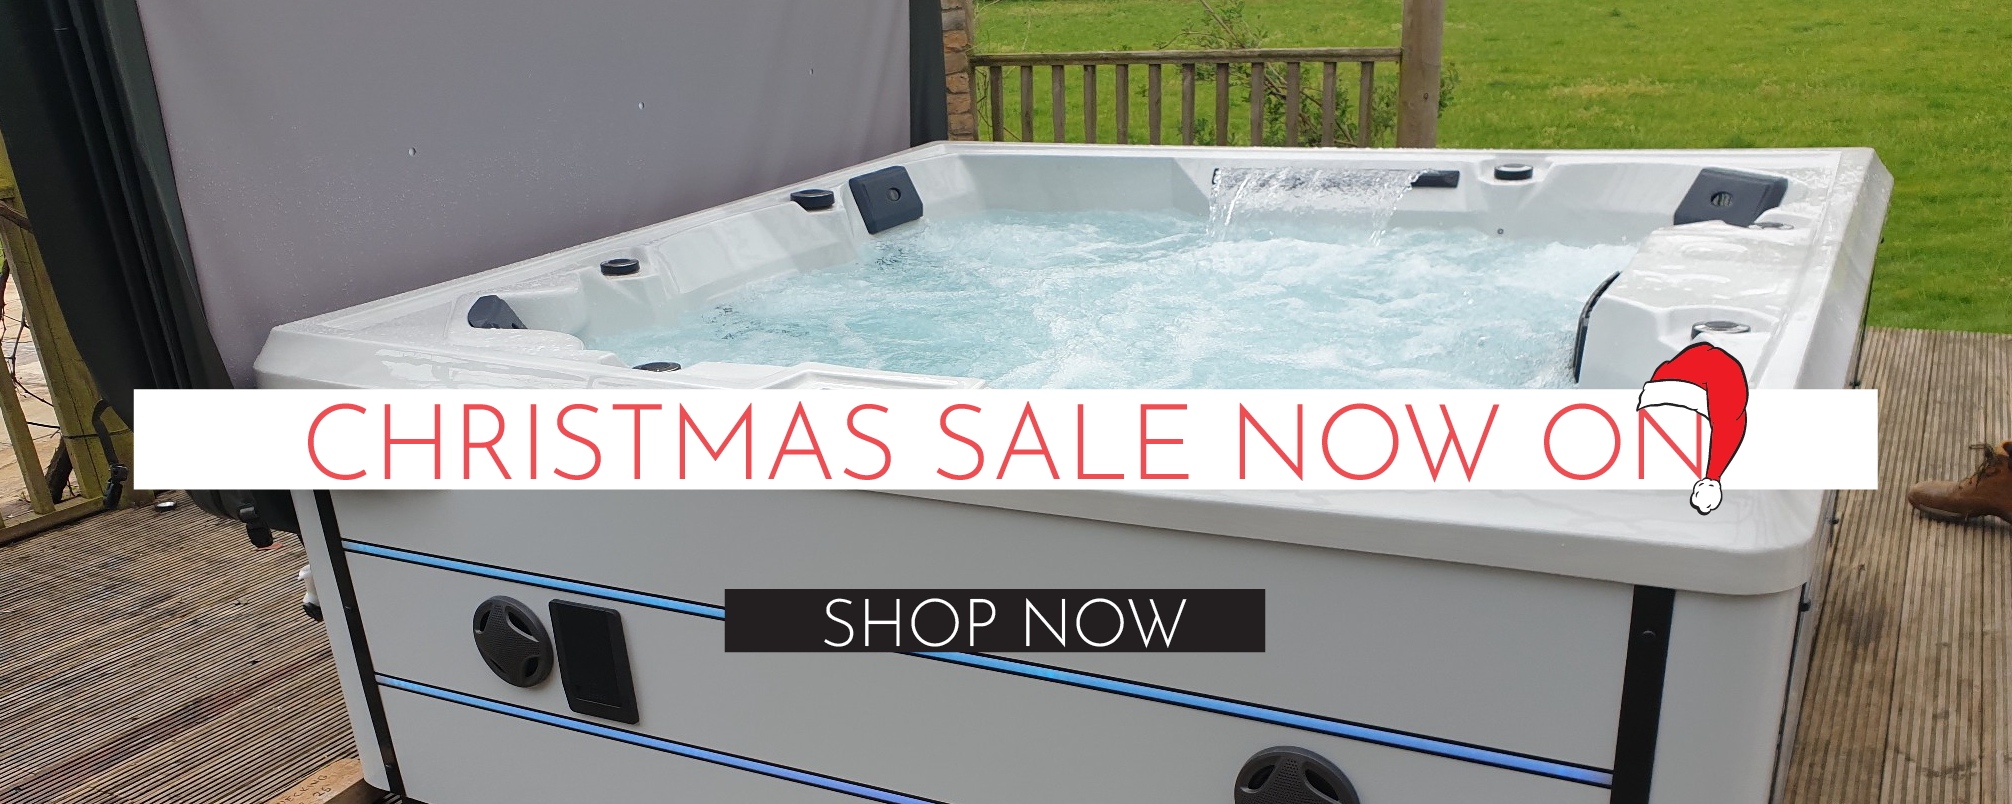 Hot Tubs For Sale